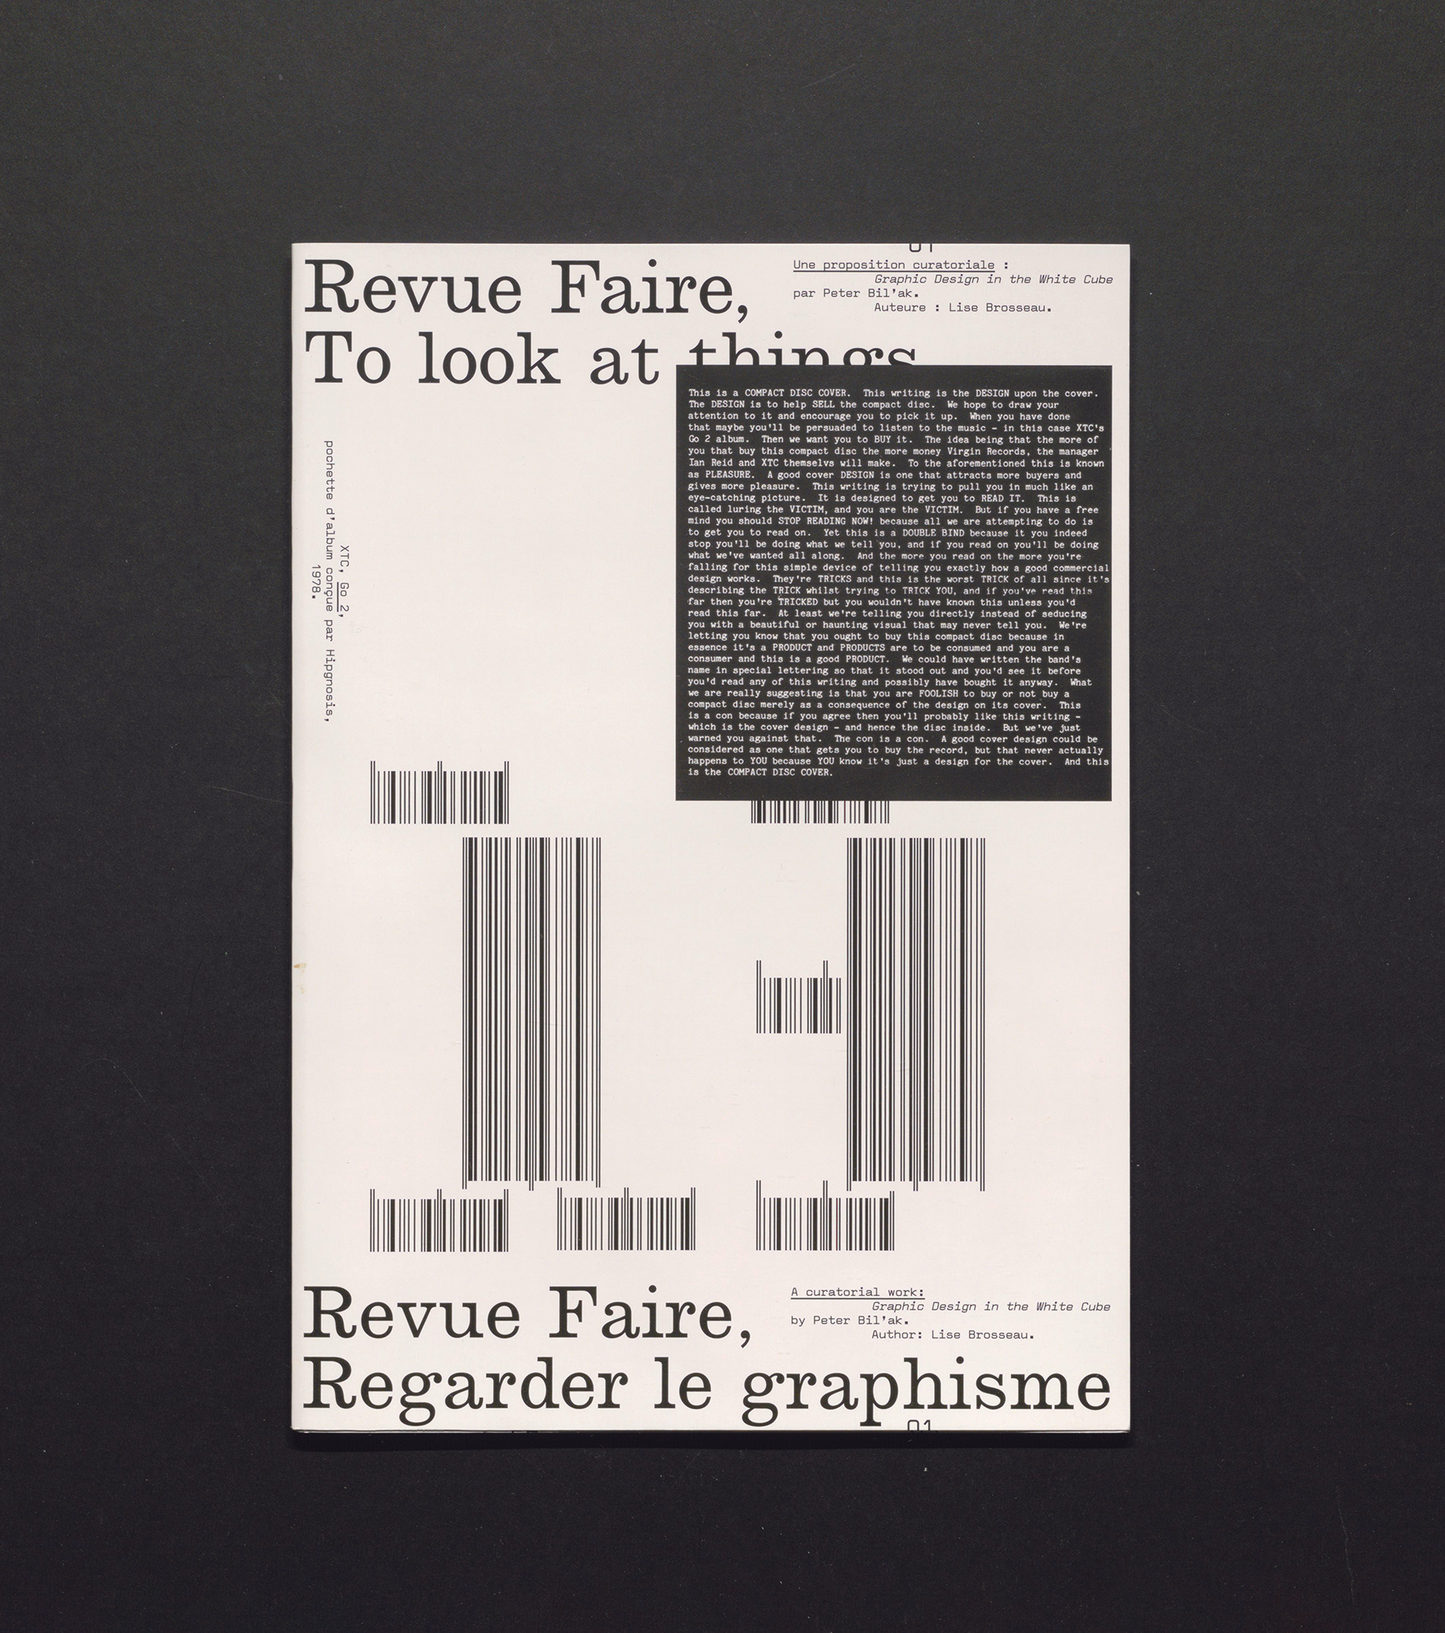 Revue Faire No. 13 - A curatorial work: Graphic Design in the White Cube by Peter Bil’ak